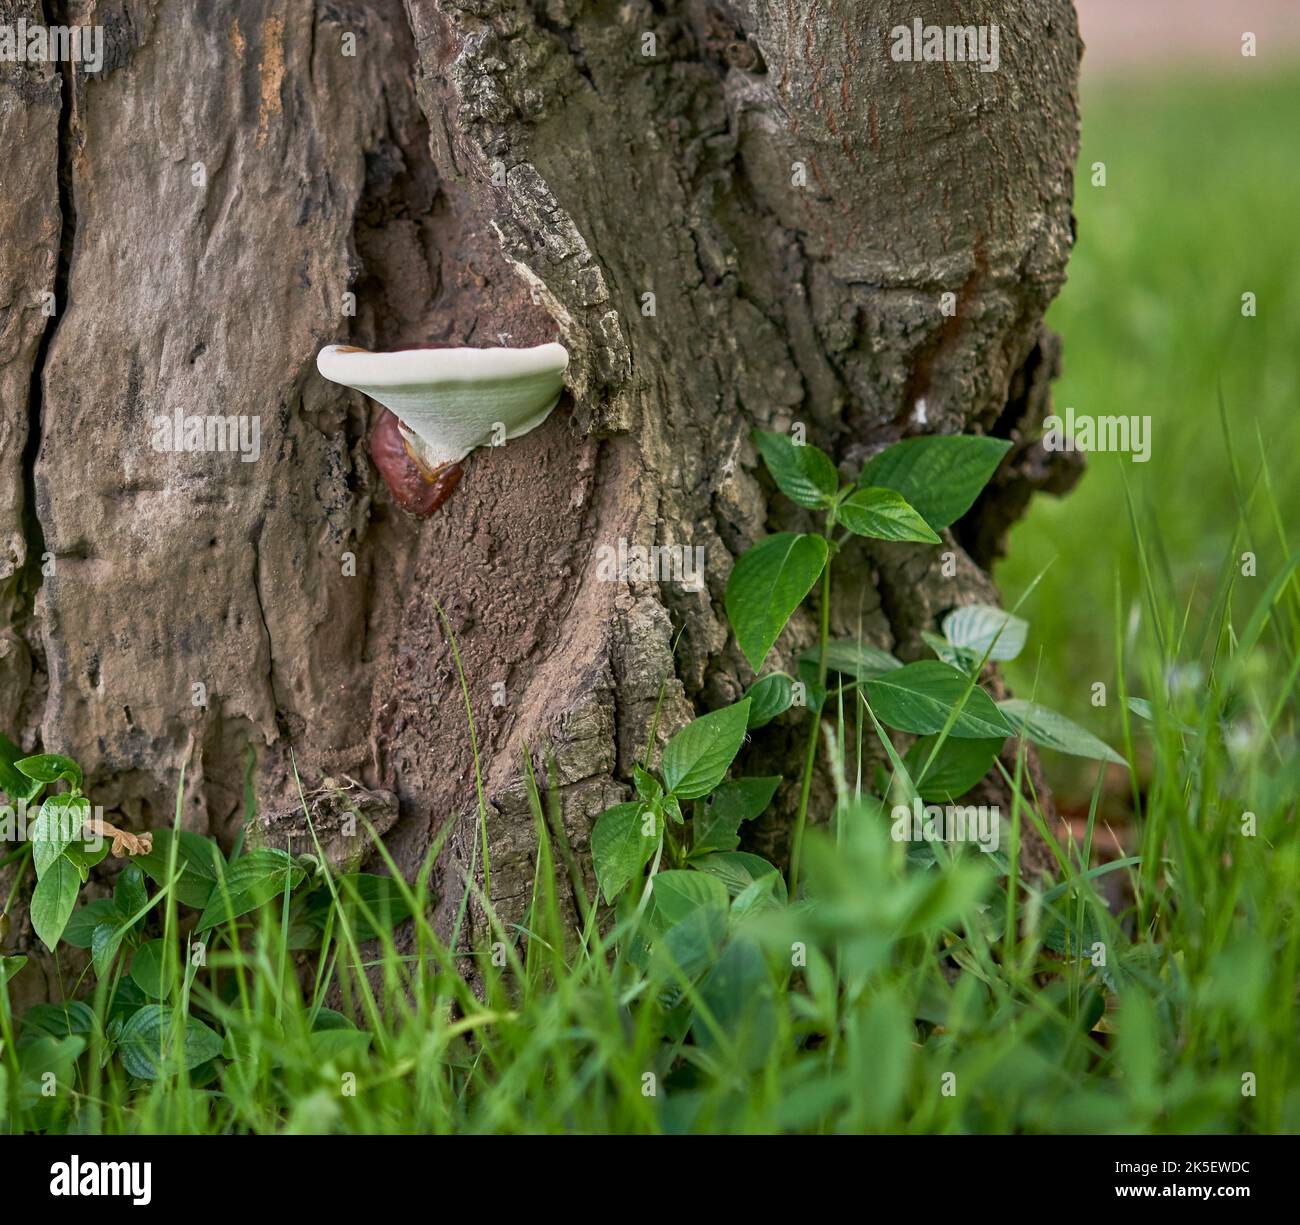 Collection 101+ Images white mushroom growing on tree stump Latest